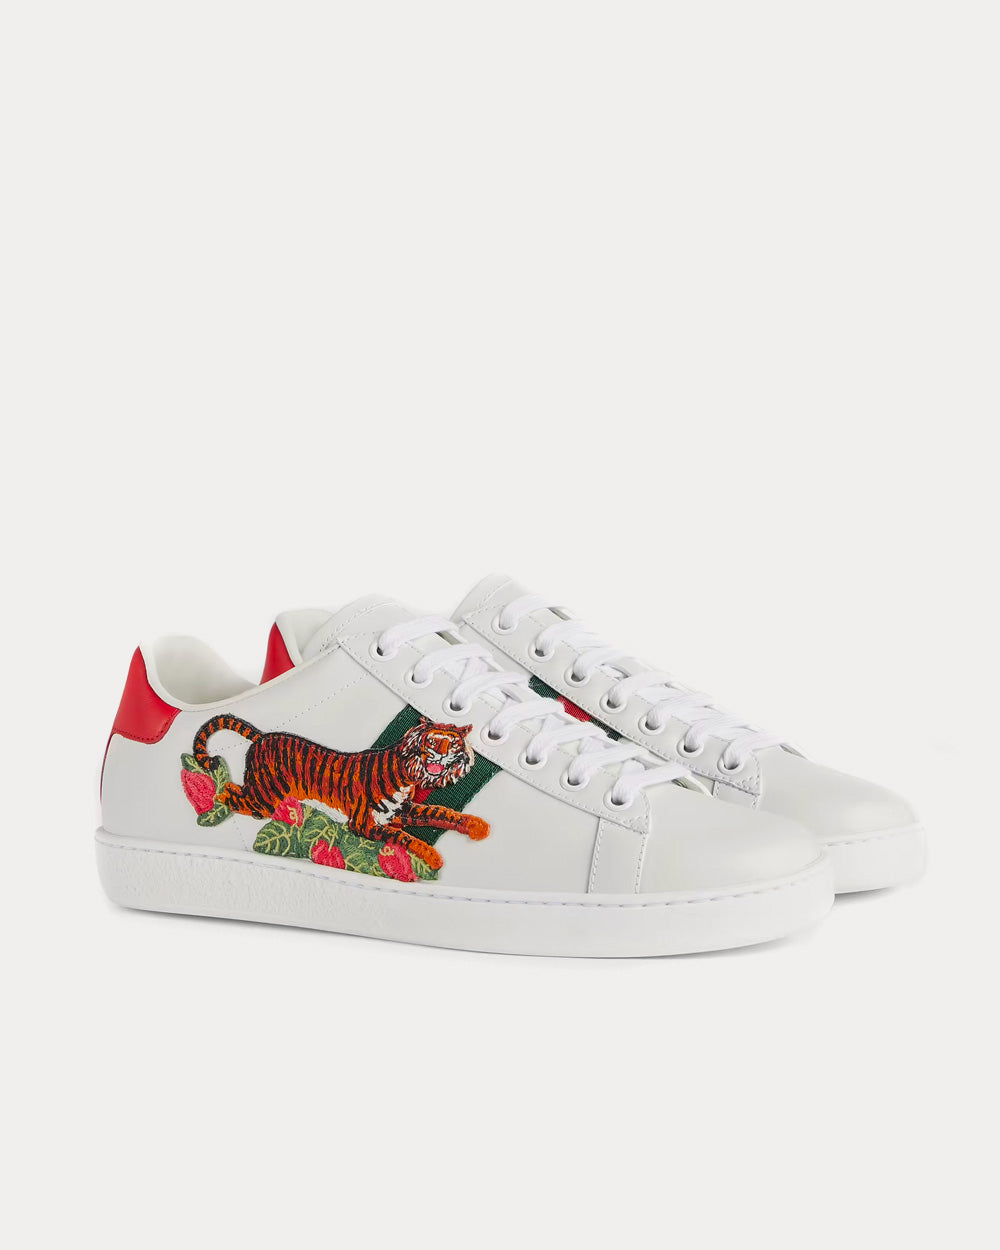 Gucci - Tiger Ace Leather White Low Top Sneakers